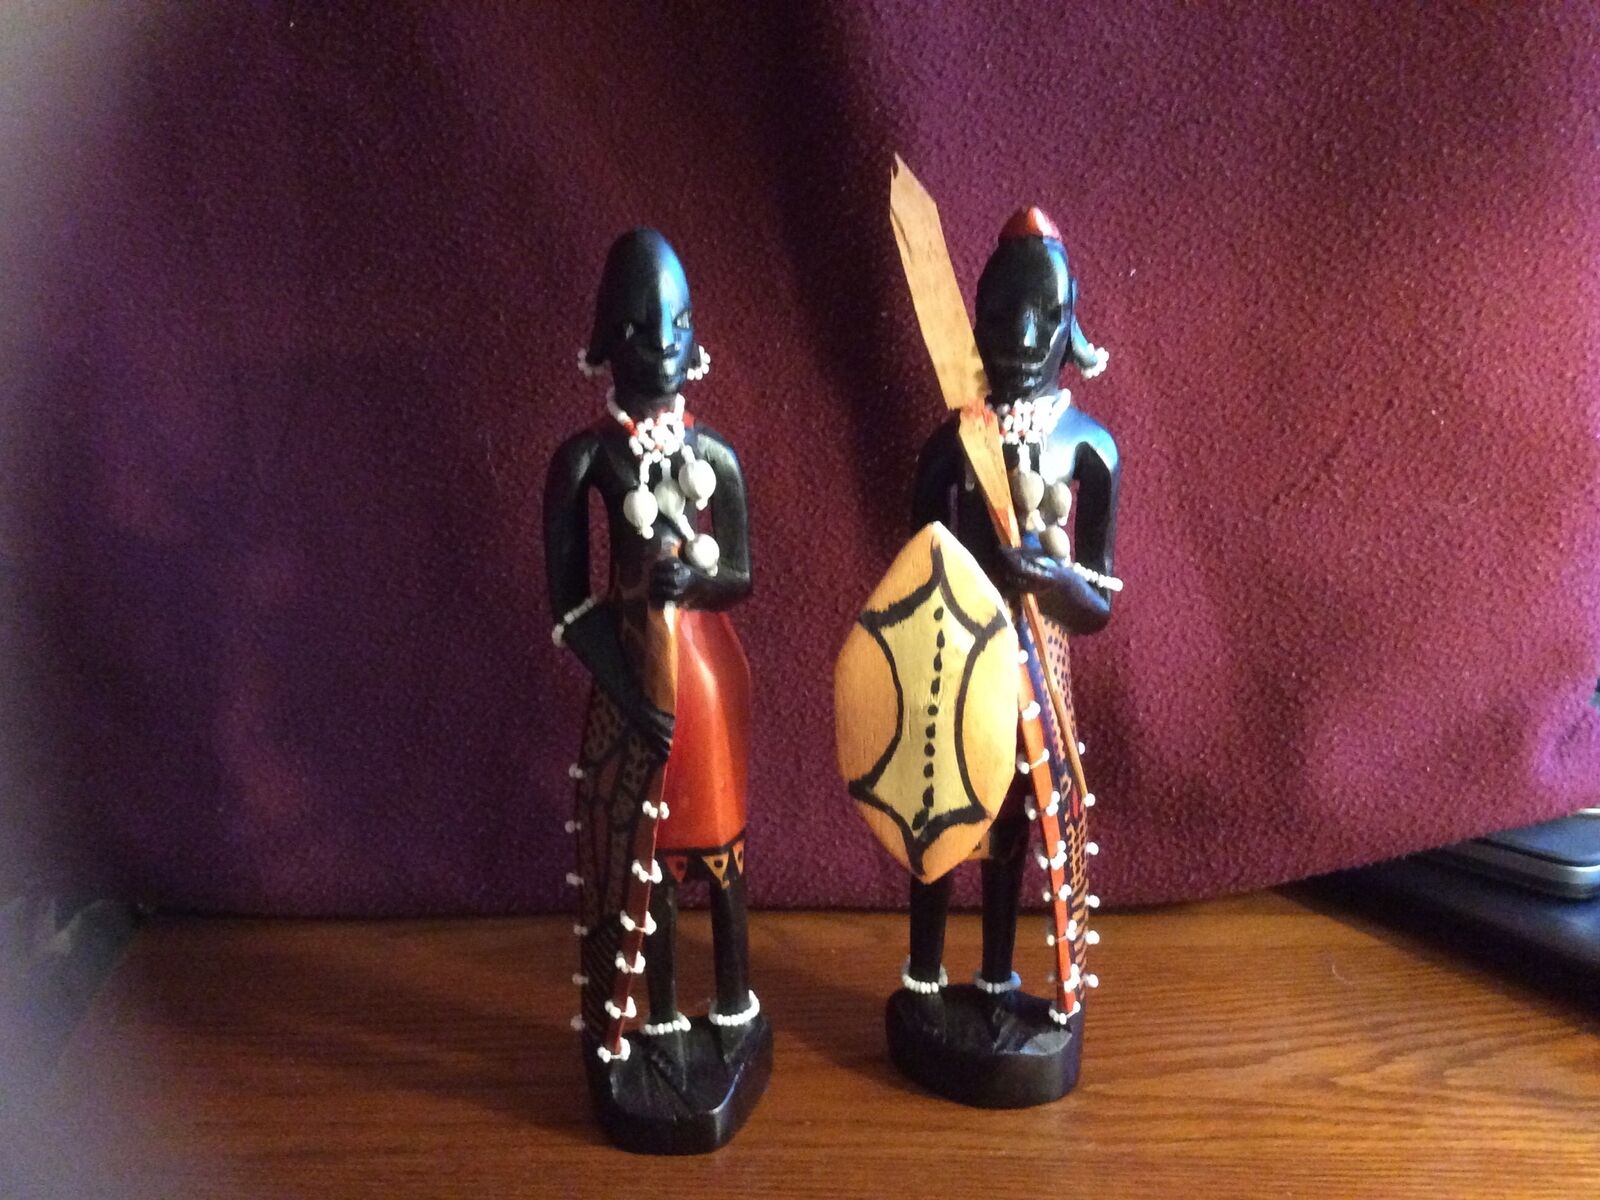 Ebony Carved Figurines Of African Warrior Couple Handcrafted W/ Beads & Shells